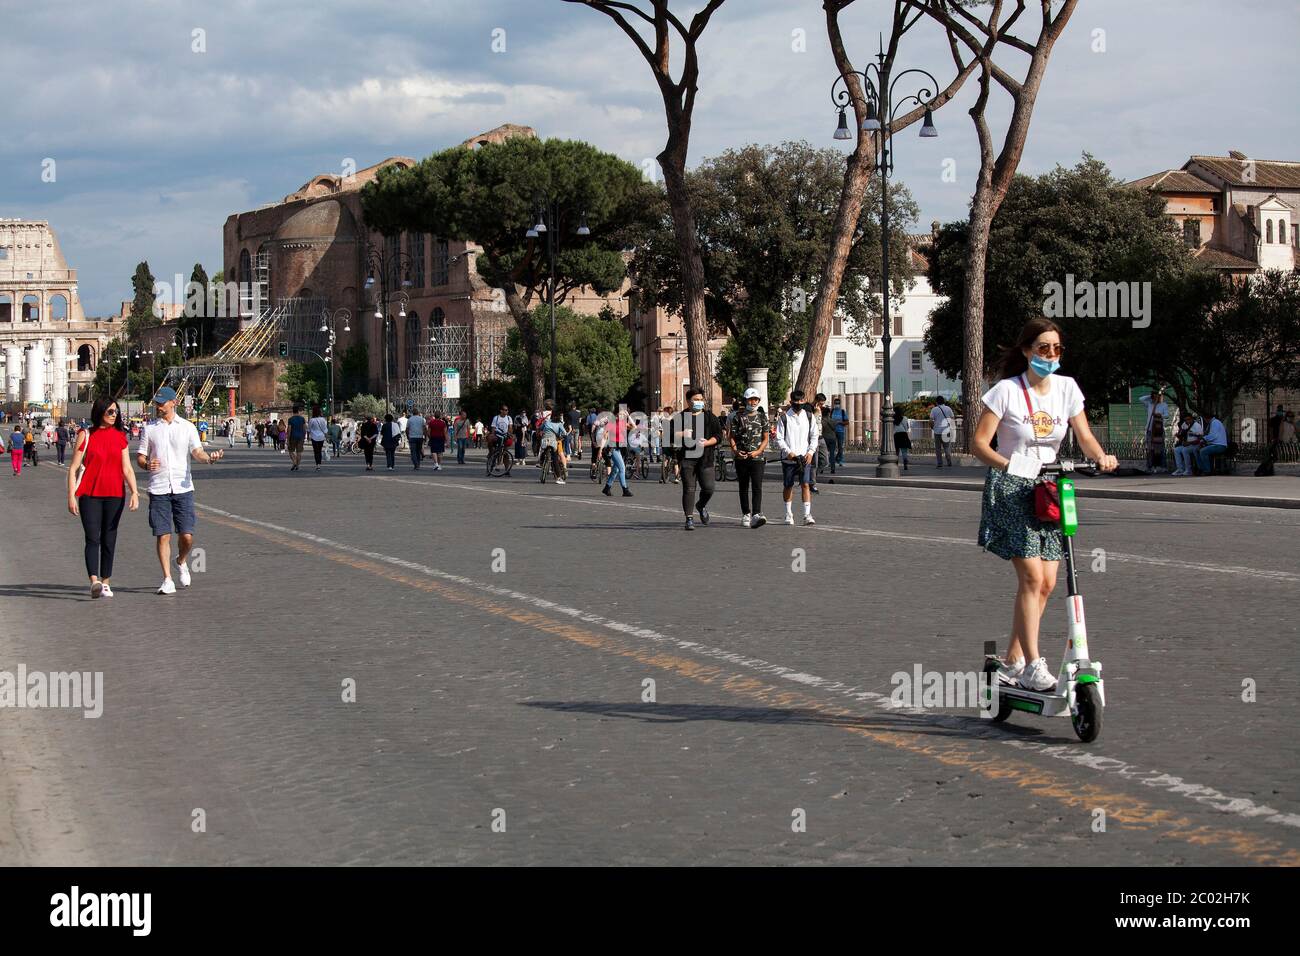 A woman wearing a protective face mask uses a electric scooters to commute in Via dei Fori Imperiali near Piazza Venezia in central Rome on June 02, 2020 as Italy starts to ease its lockdown, during the country's lockdown aimed at curbing the spread of the COVID-19 infection, caused by the novel coronavirus. The electric scooters of the American company Lime. Stock Photo